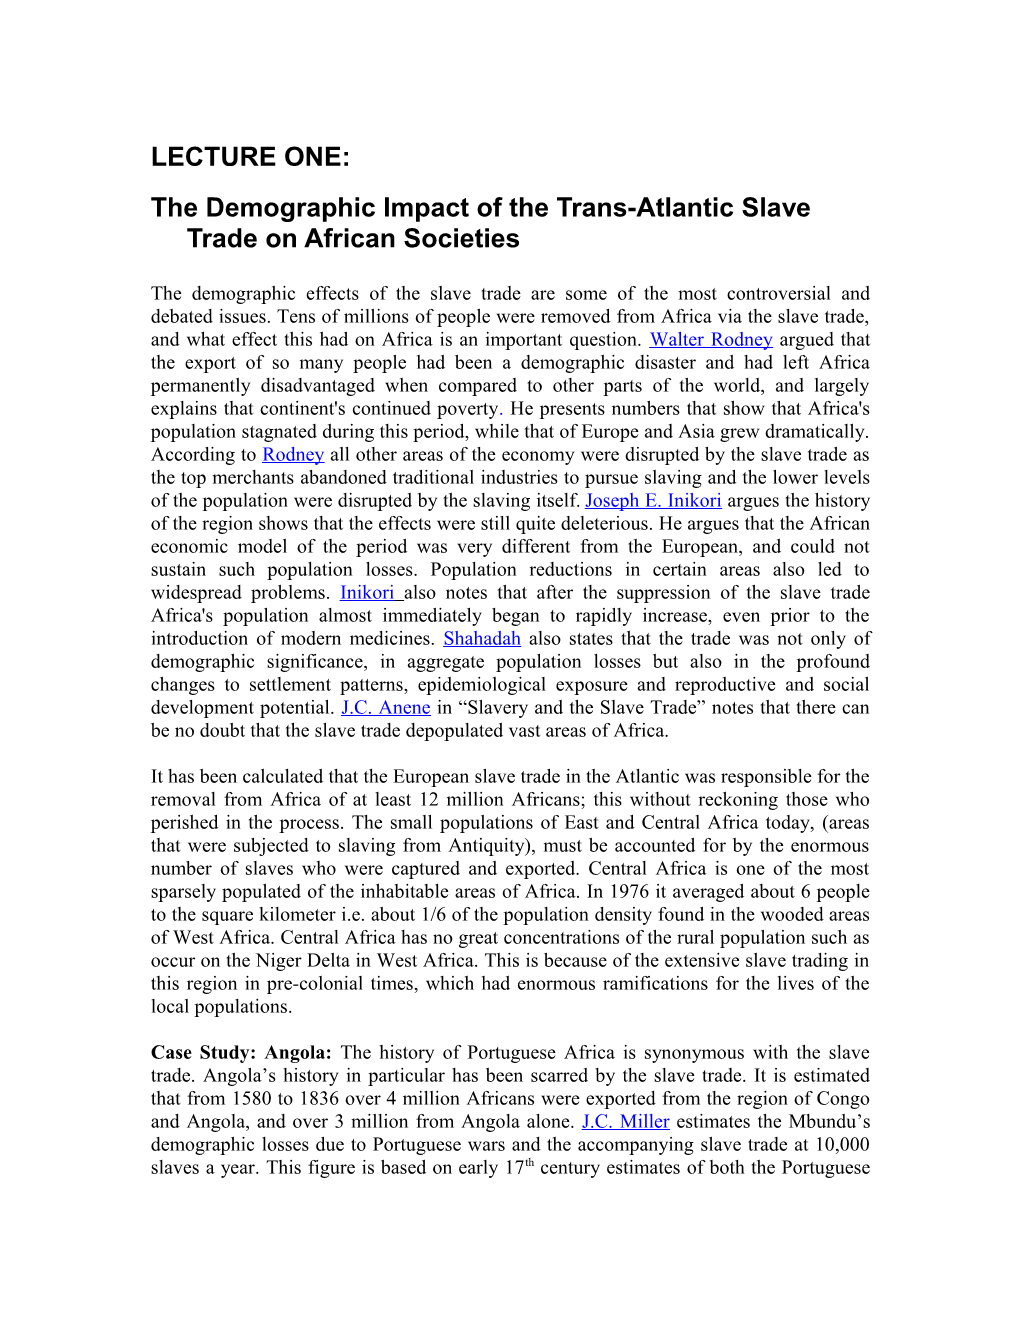 The Demographic Impact of the Trans-Atlantic Slave Trade on African Societies